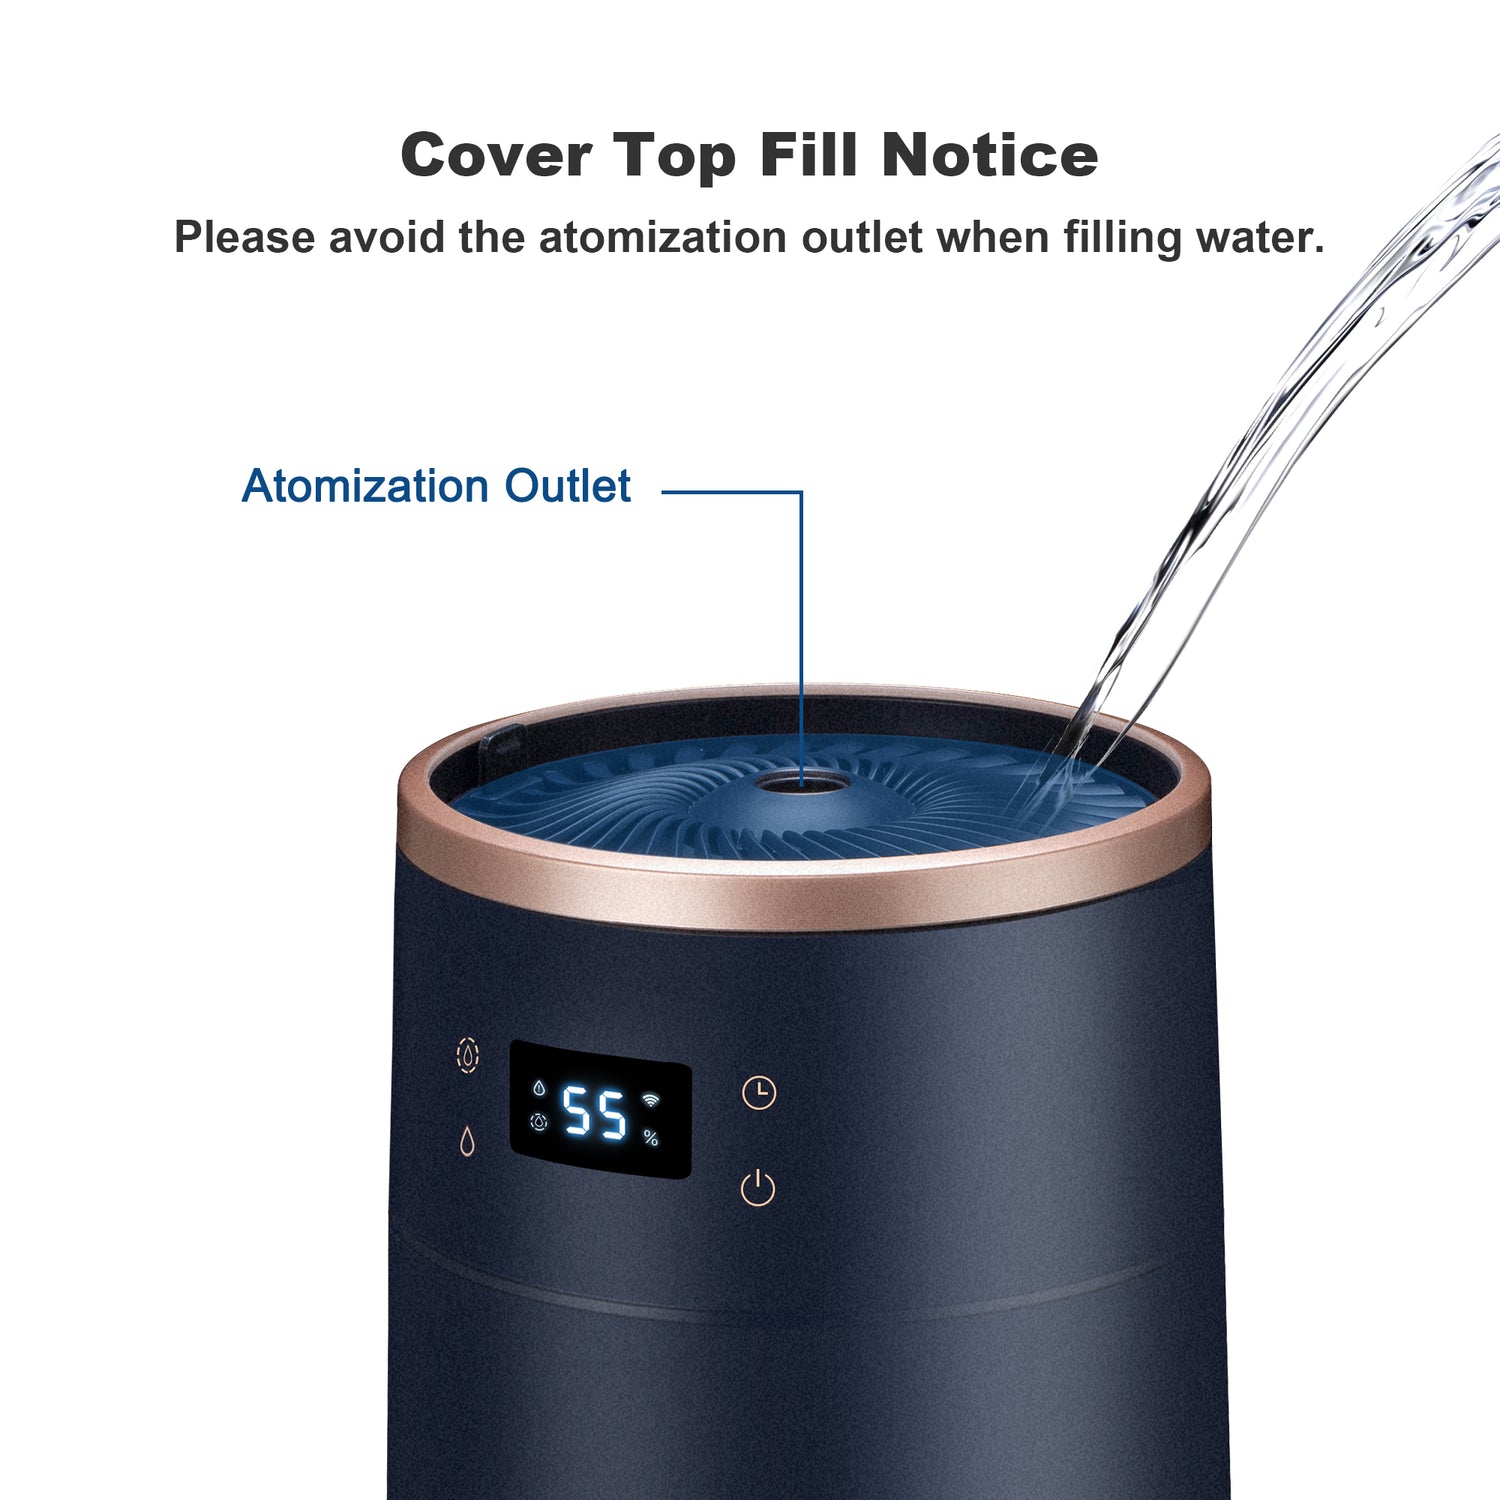 Carro Jacinto Humidifier, with Ultrasonic Technology, quietly disperses a sufficient amount of cool mist into the air providing relief from the dry air. The humidifier is equipped with a 1-8 hours timer and variable touch/APP mist control. 